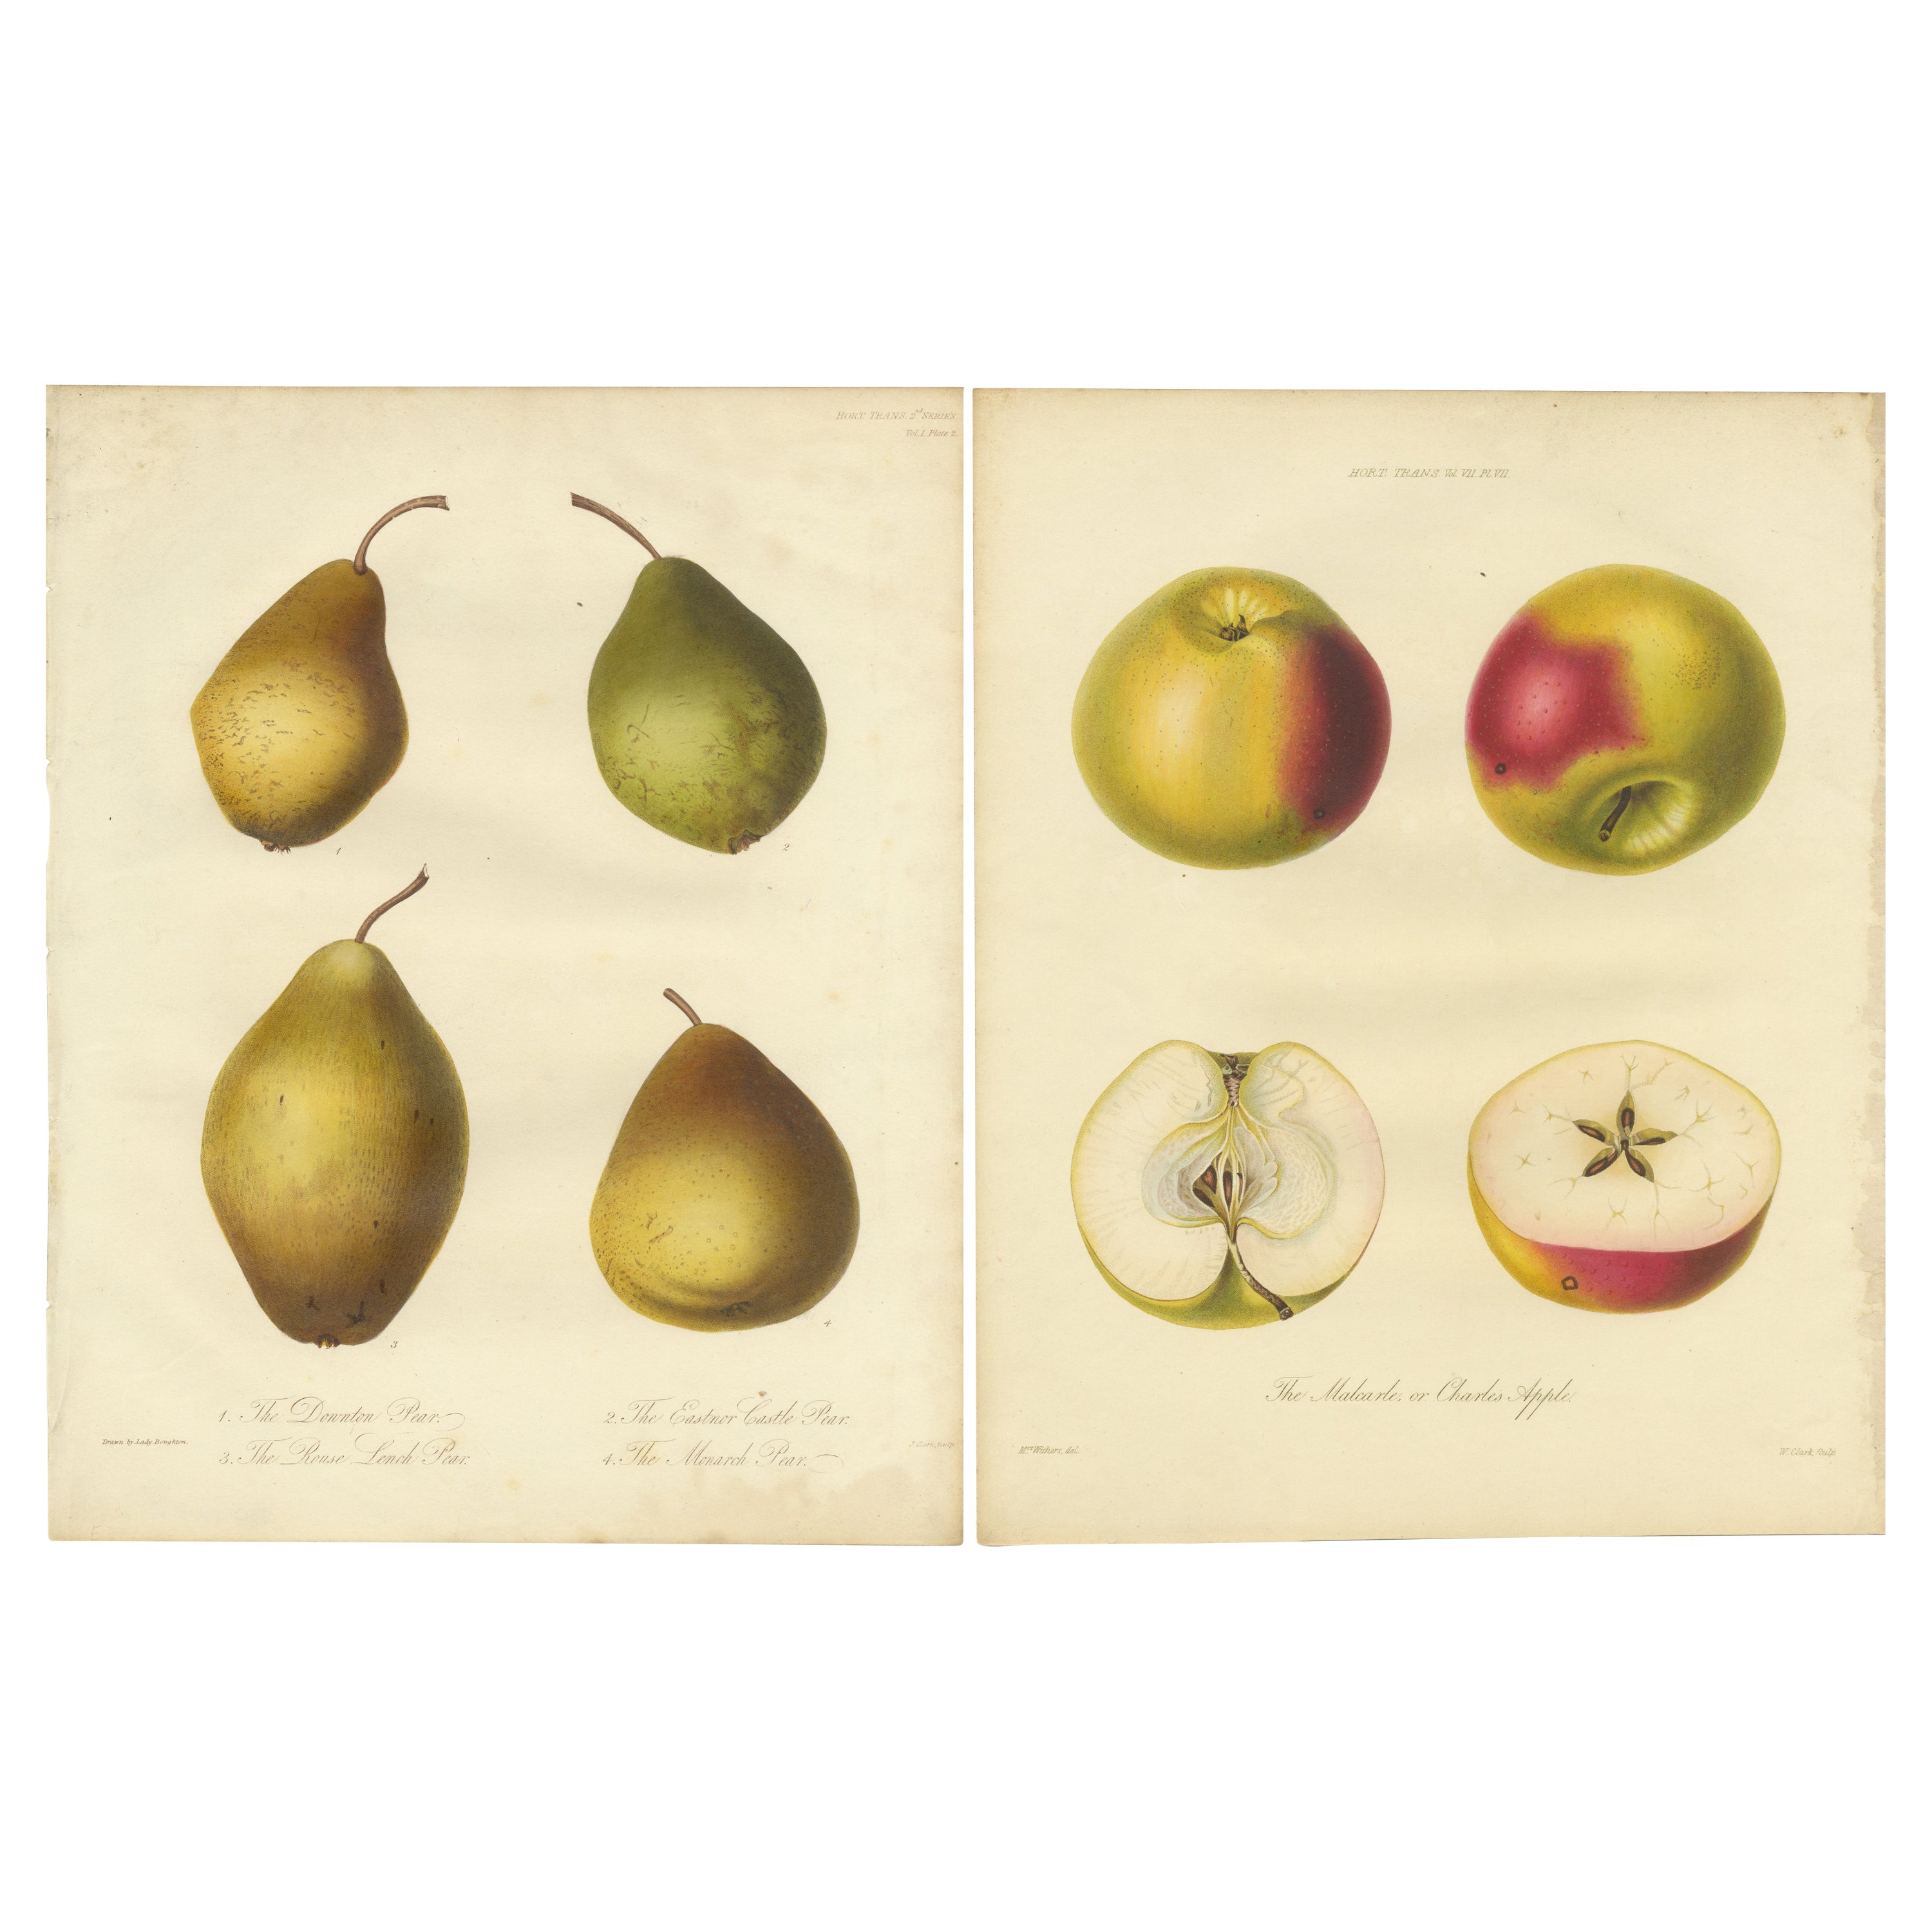 Set of 2 Original Antique Prints of various Pears and Apples